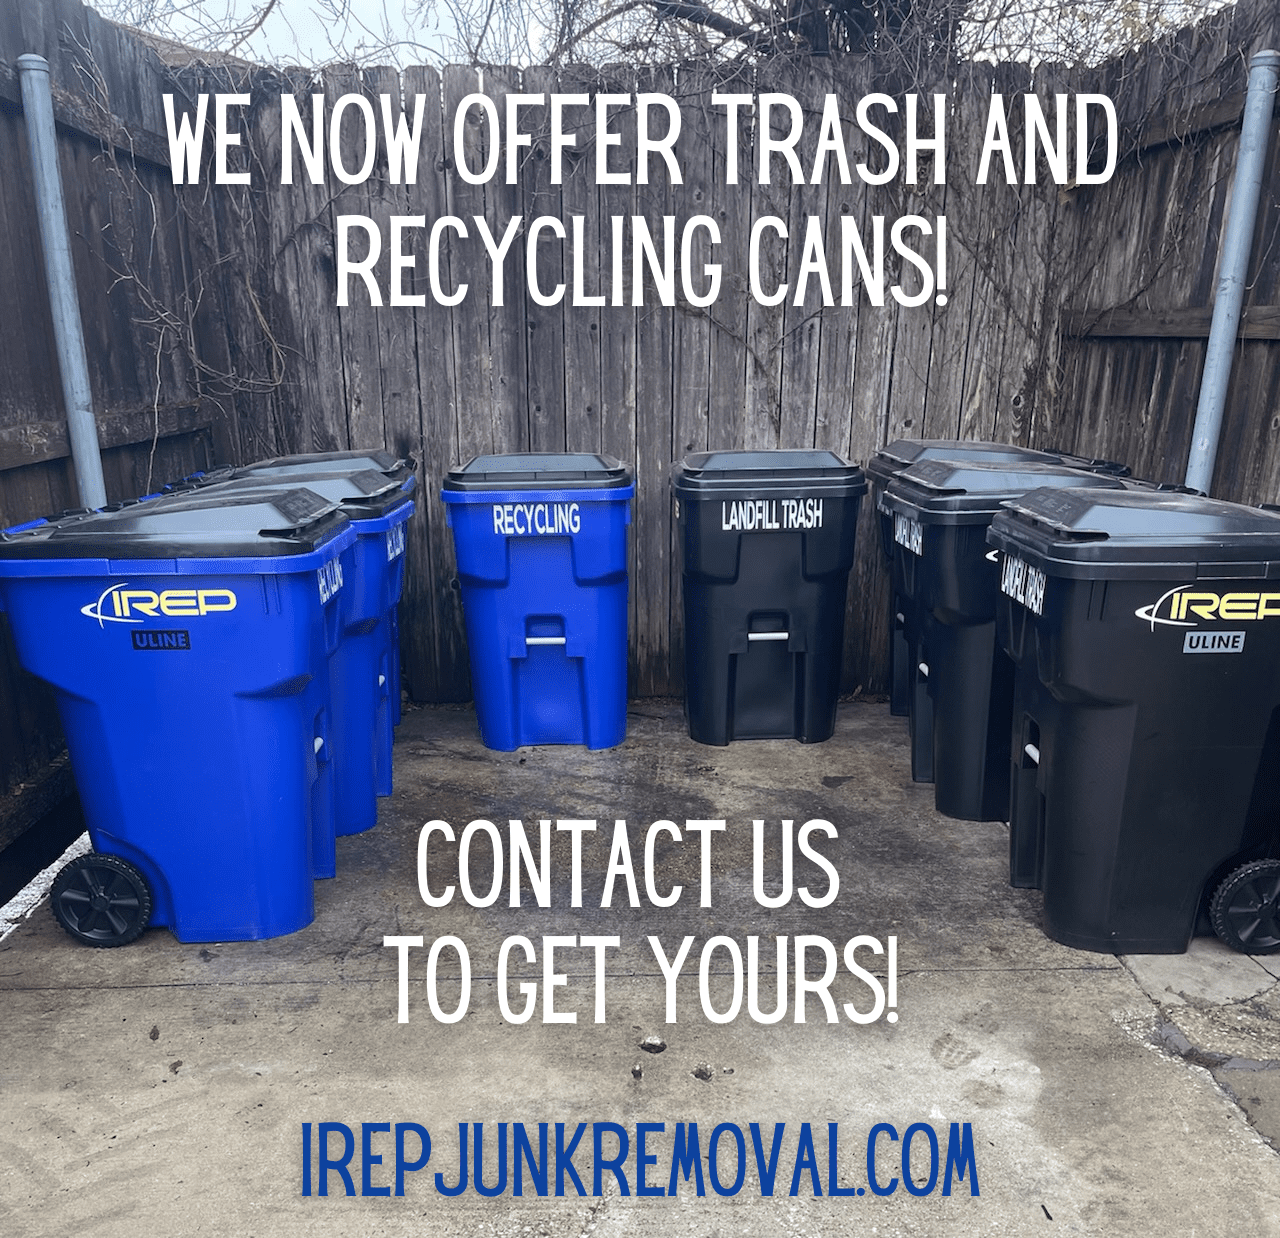 95-gallon trash and recycling bins for regular pick up in Austin